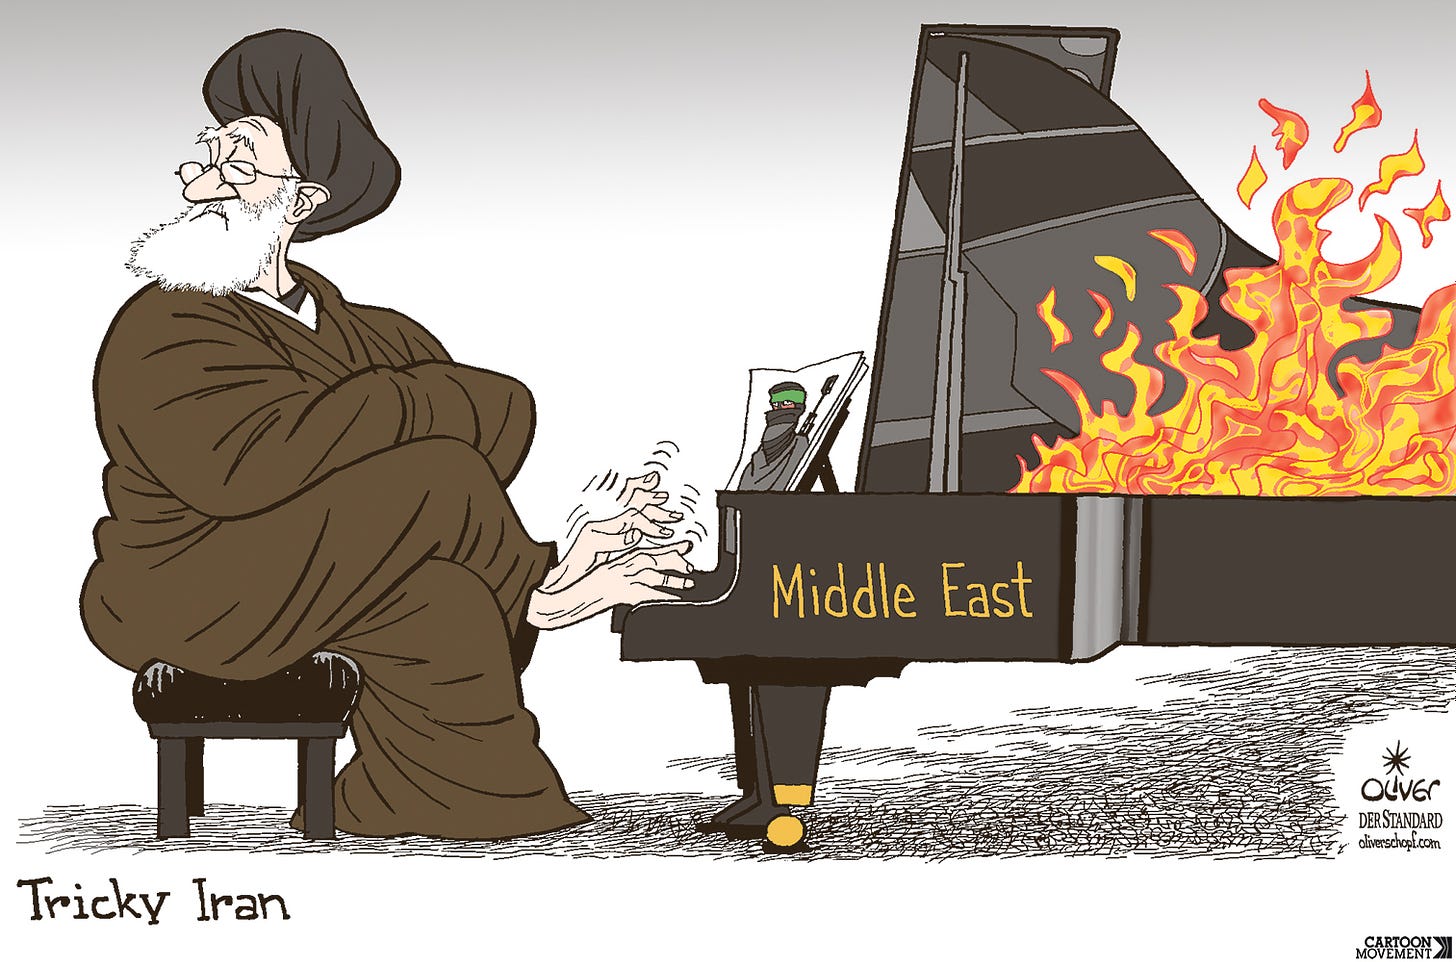 Cartoon showing Iranian leader Khamenei playing a piano with his feet, while his arms are crossed. The sheet music from which he is playing shows a Hamas fighter and the piano is on fire. The piano is labeled "Middle East" and the caption reads "Tricky Iran".